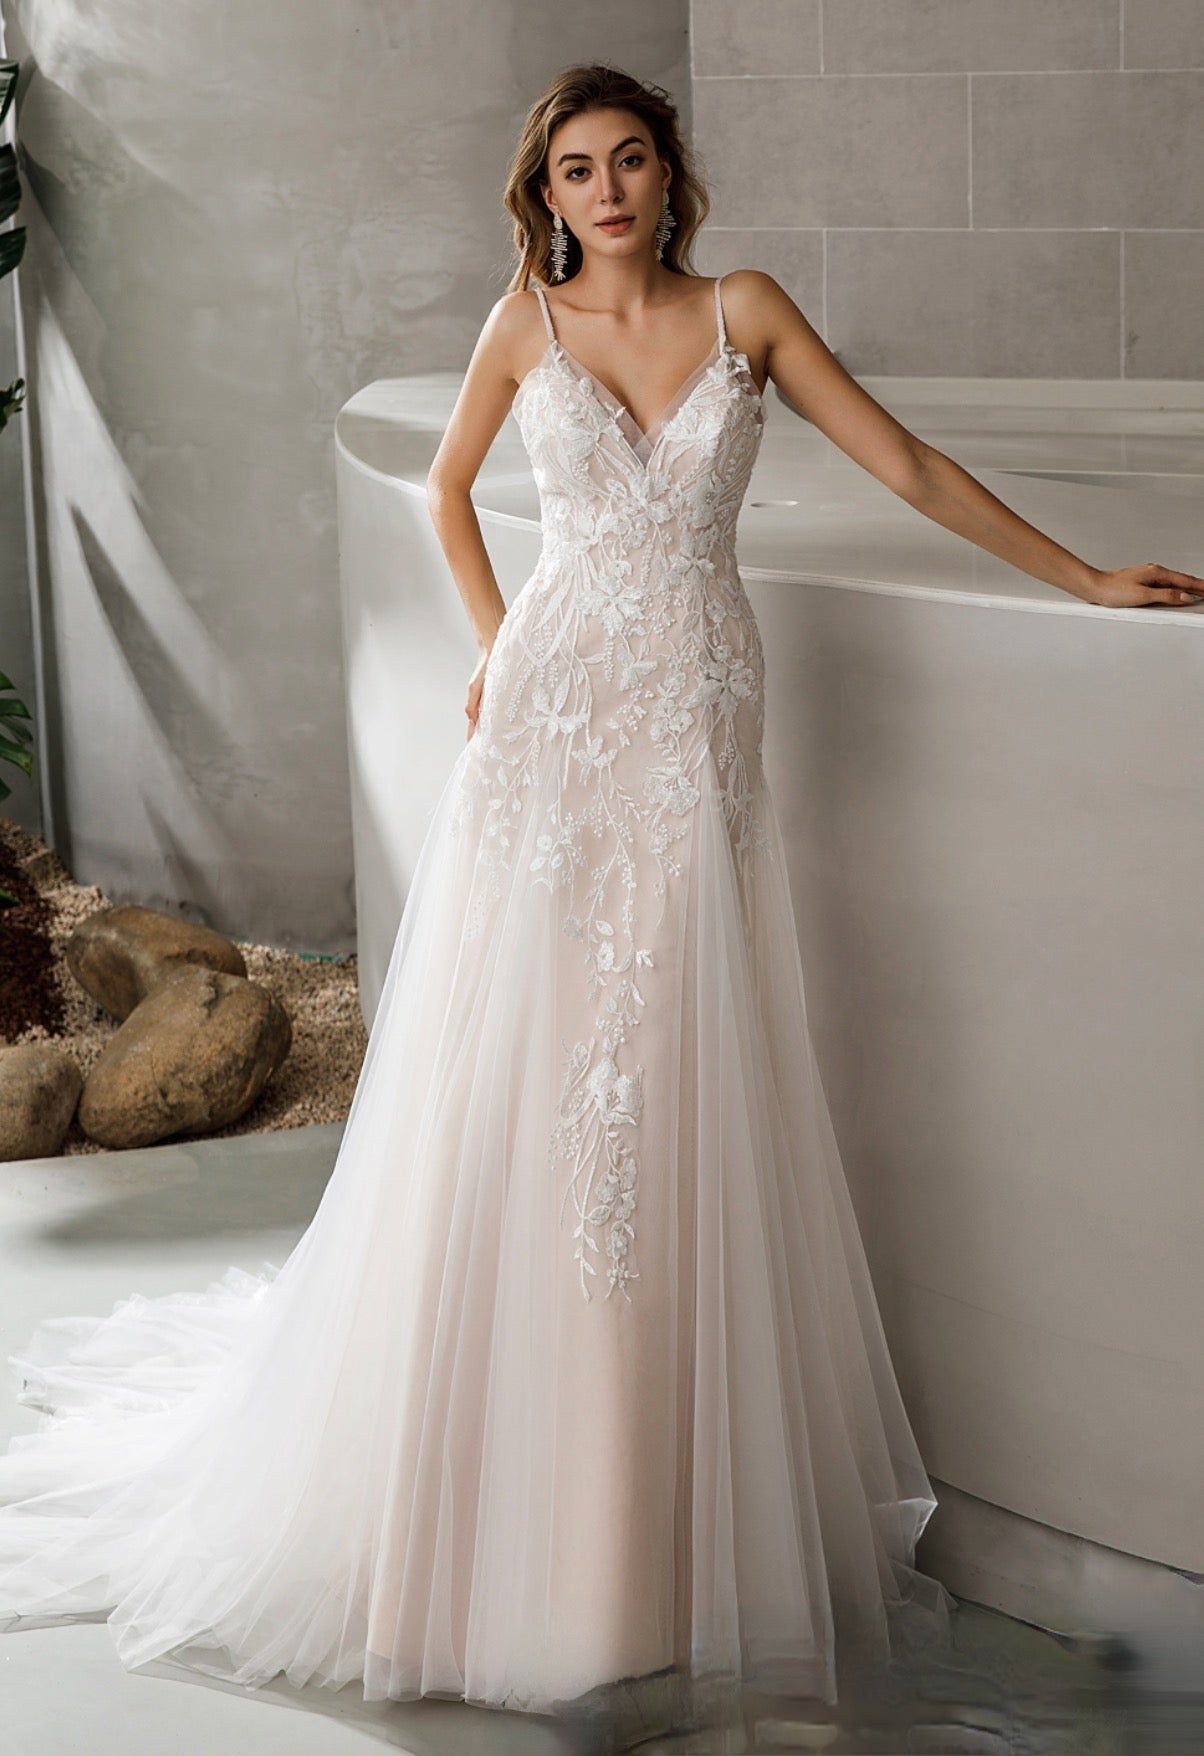 Geometric Lace Fit and Flare Bridal Gown With Sheer Train